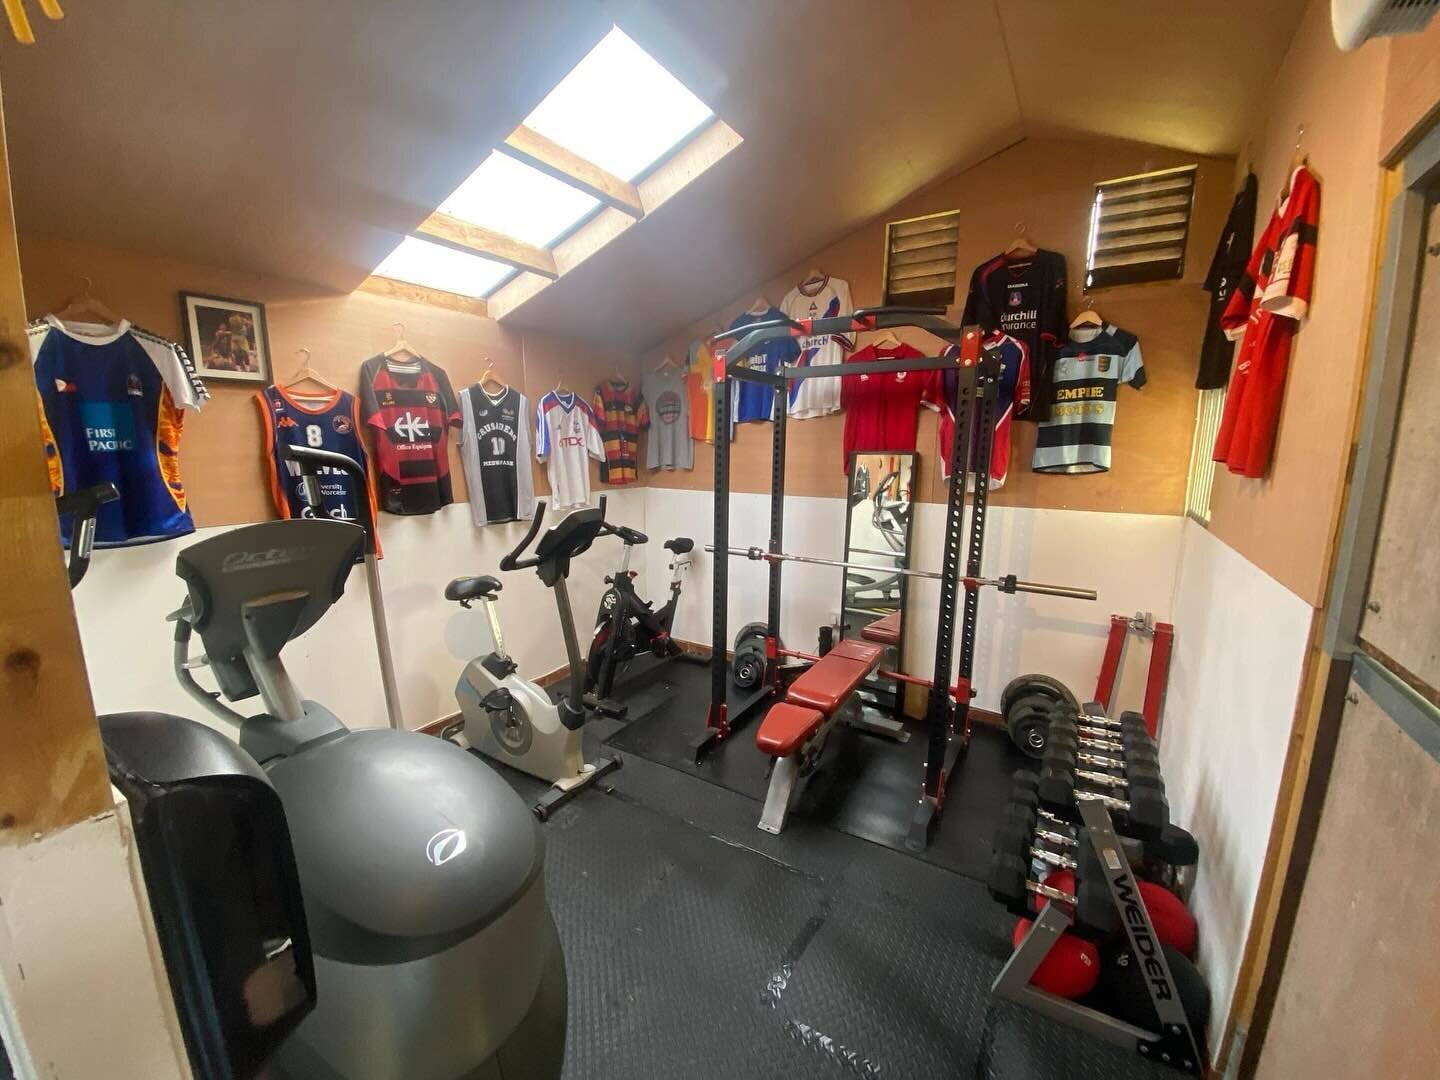 A few photos of the Ives Fitness gym - indoor and outdoor training, tailored to meet your needs!

Located part-way between Godstone and Oxted (just off the A25, not far from Knights Garden Centre.)

... heating included 🥶😊

#eastsurreyfitness #east